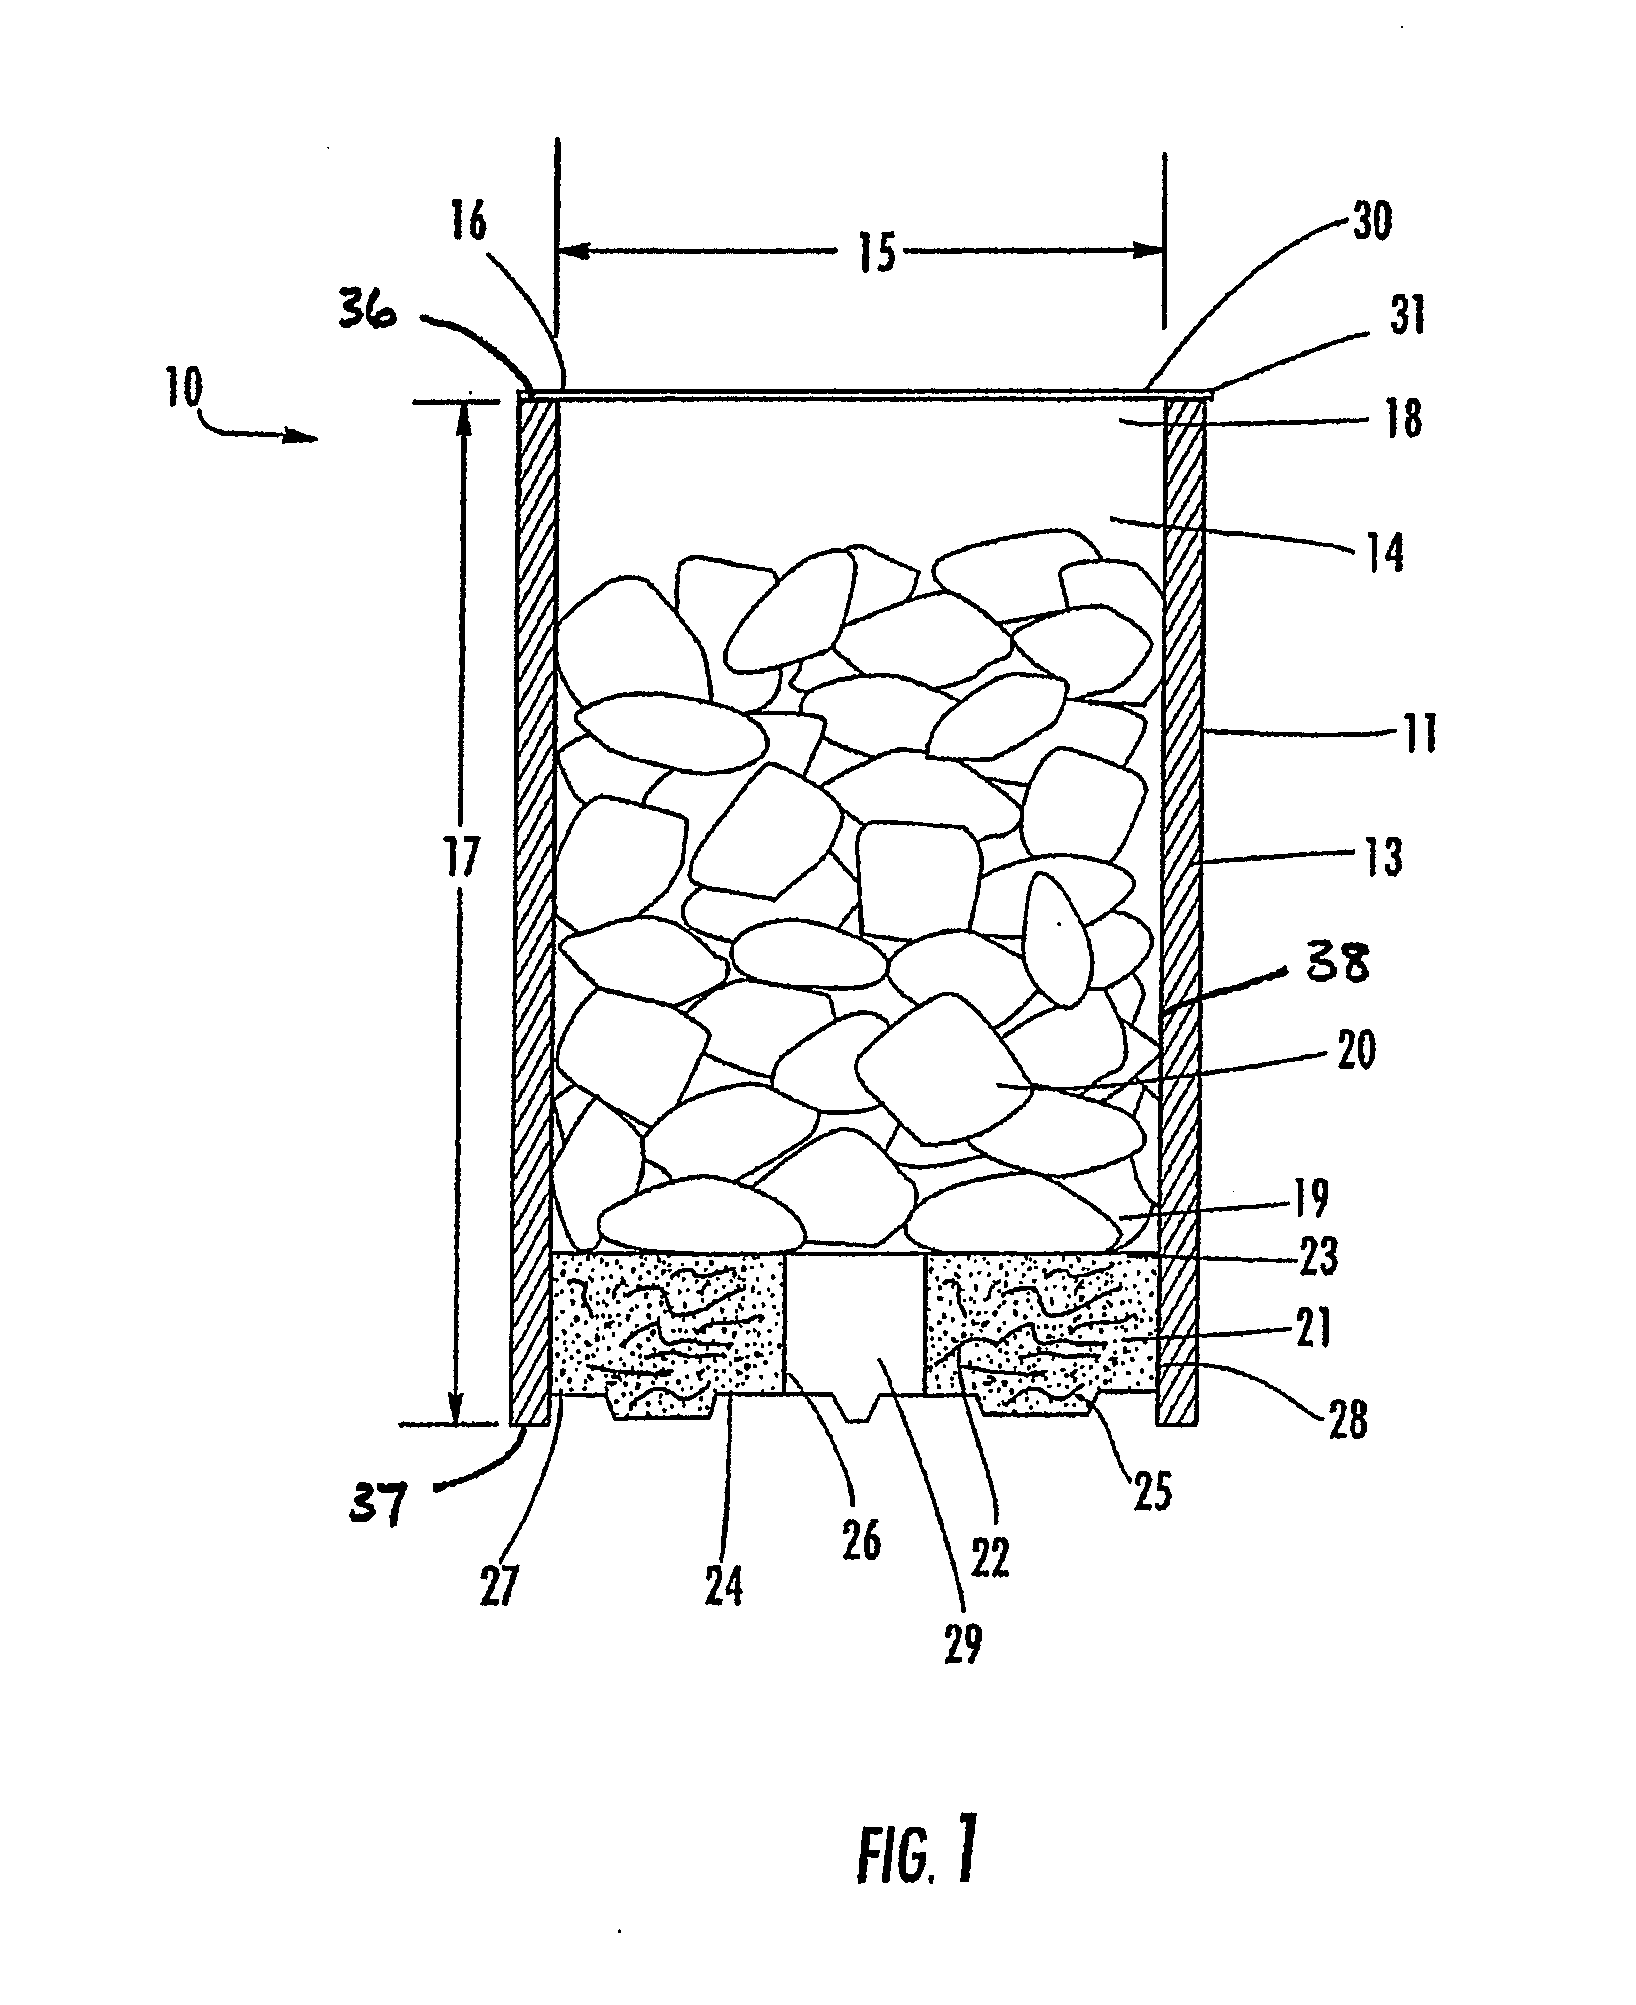 Combustible Packages for Containing a Fuel Source and a Fire Starter